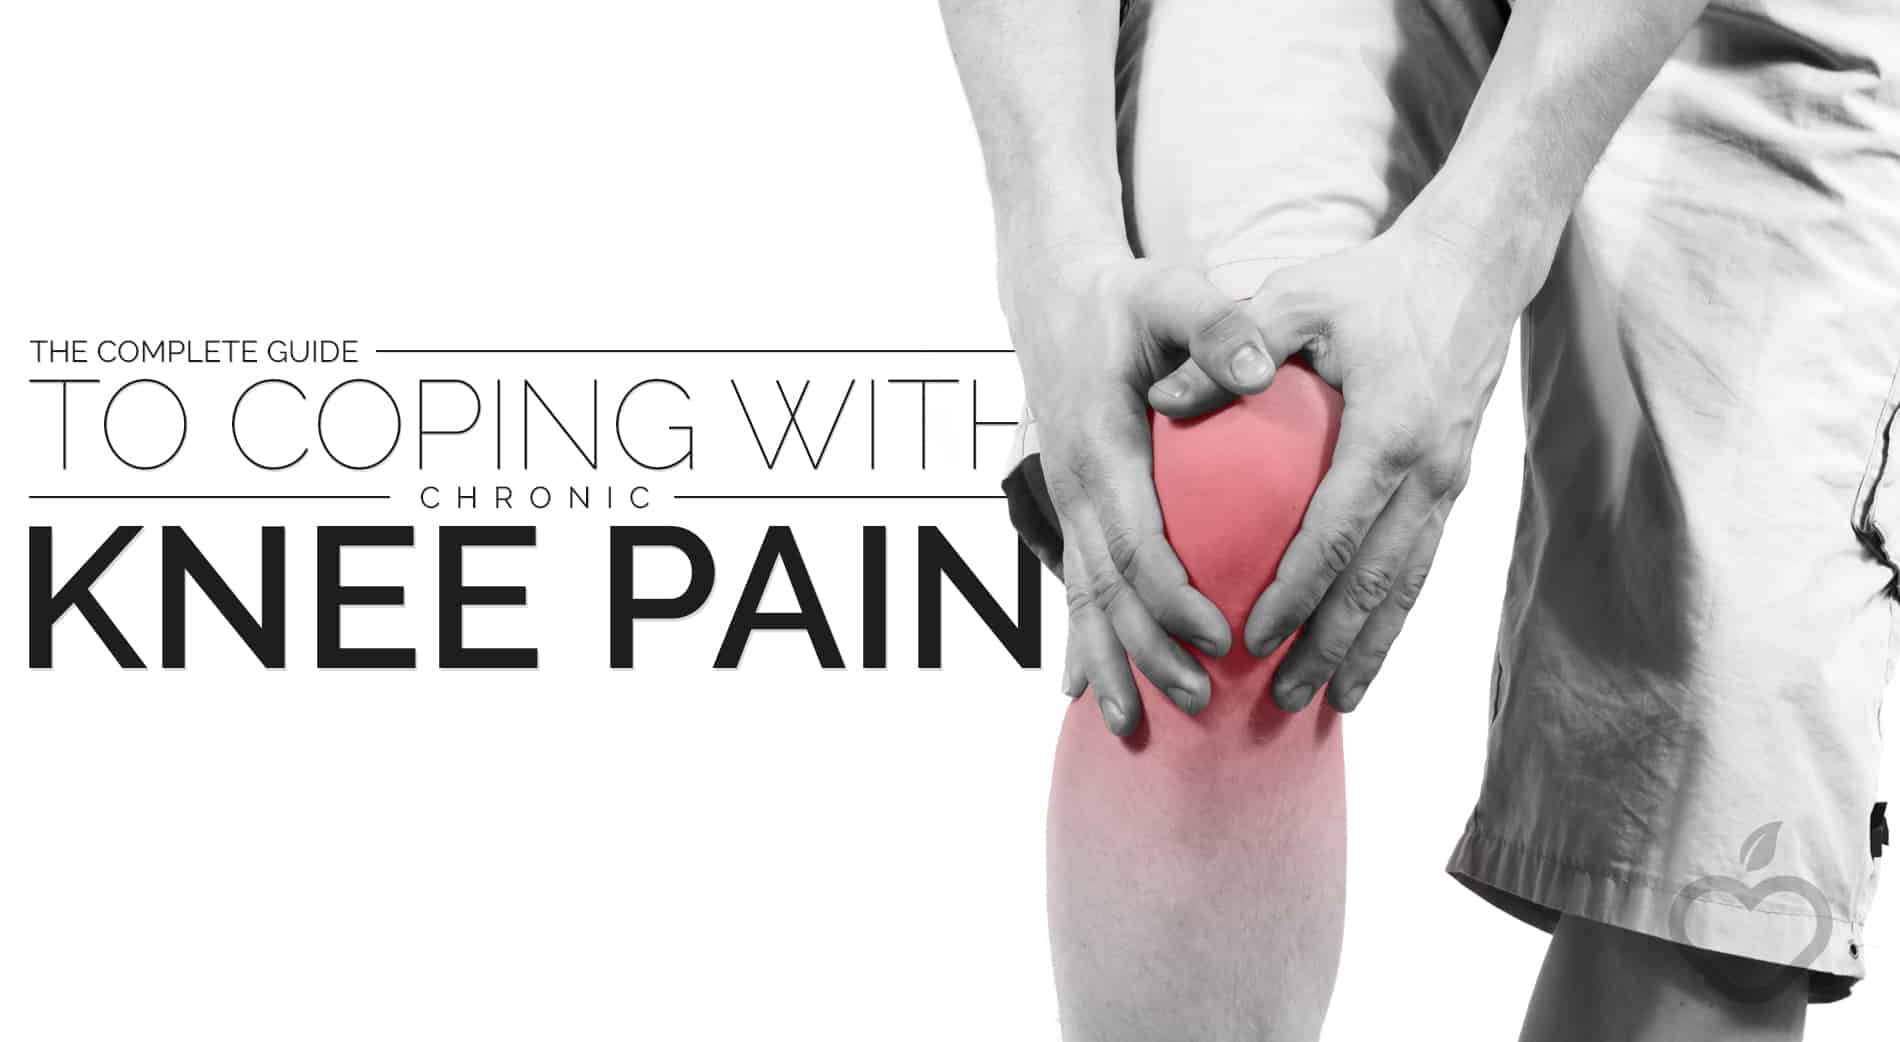 The Complete Guide to Coping with Chronic Knee Pain